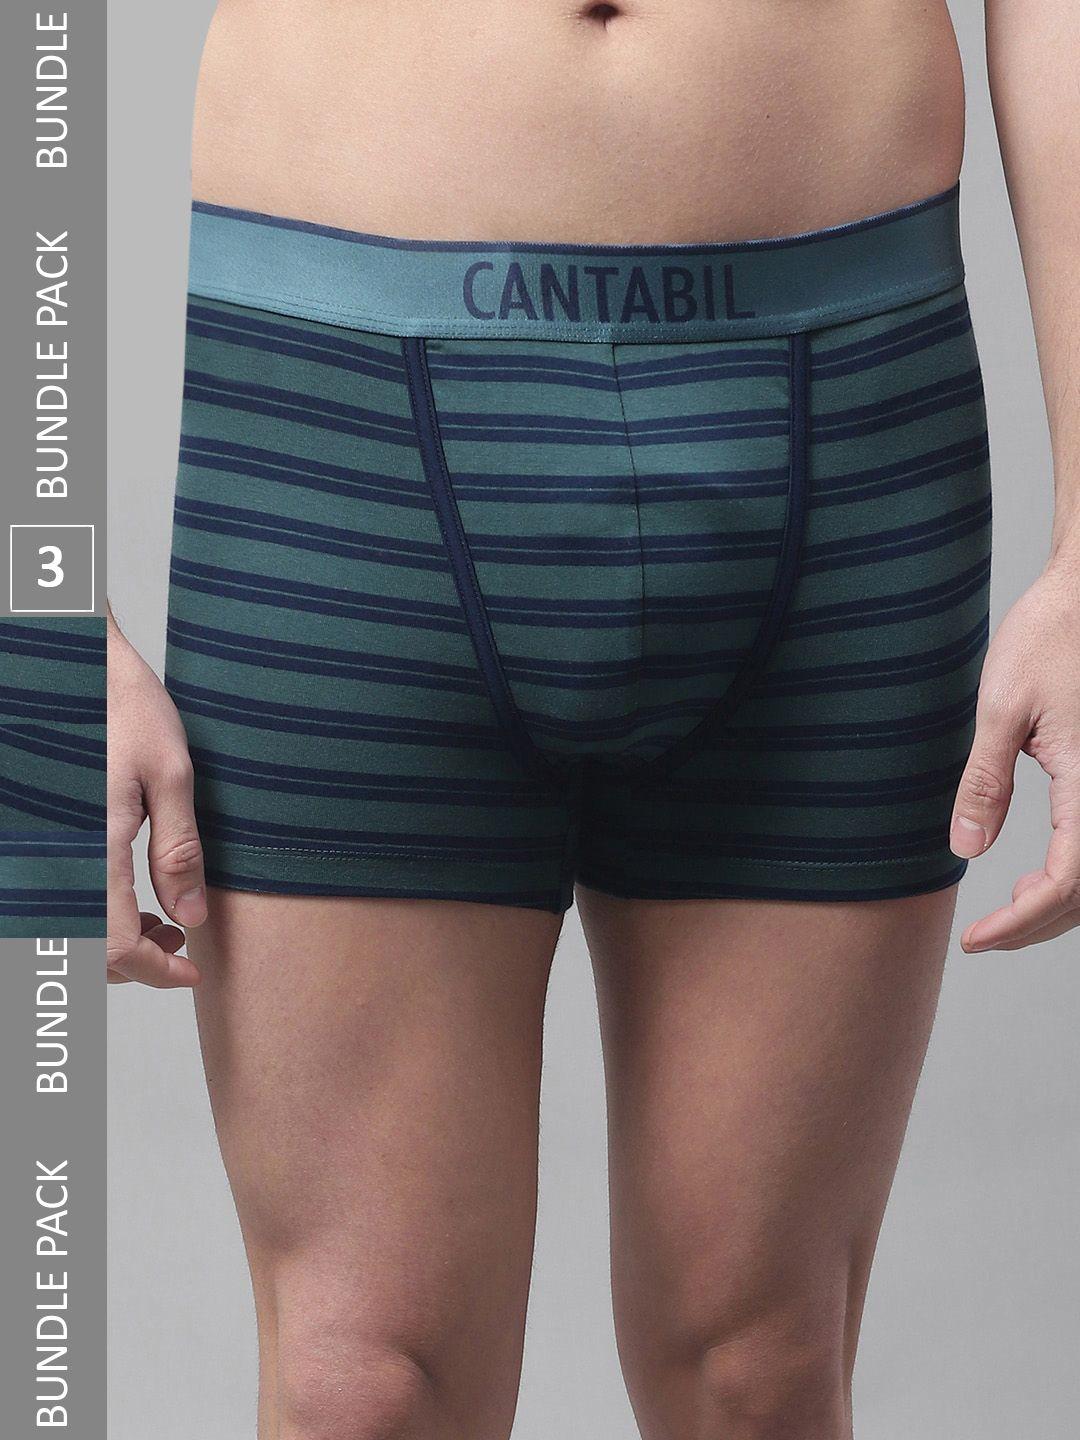 cantabil men pack of 3 striped boxer briefs